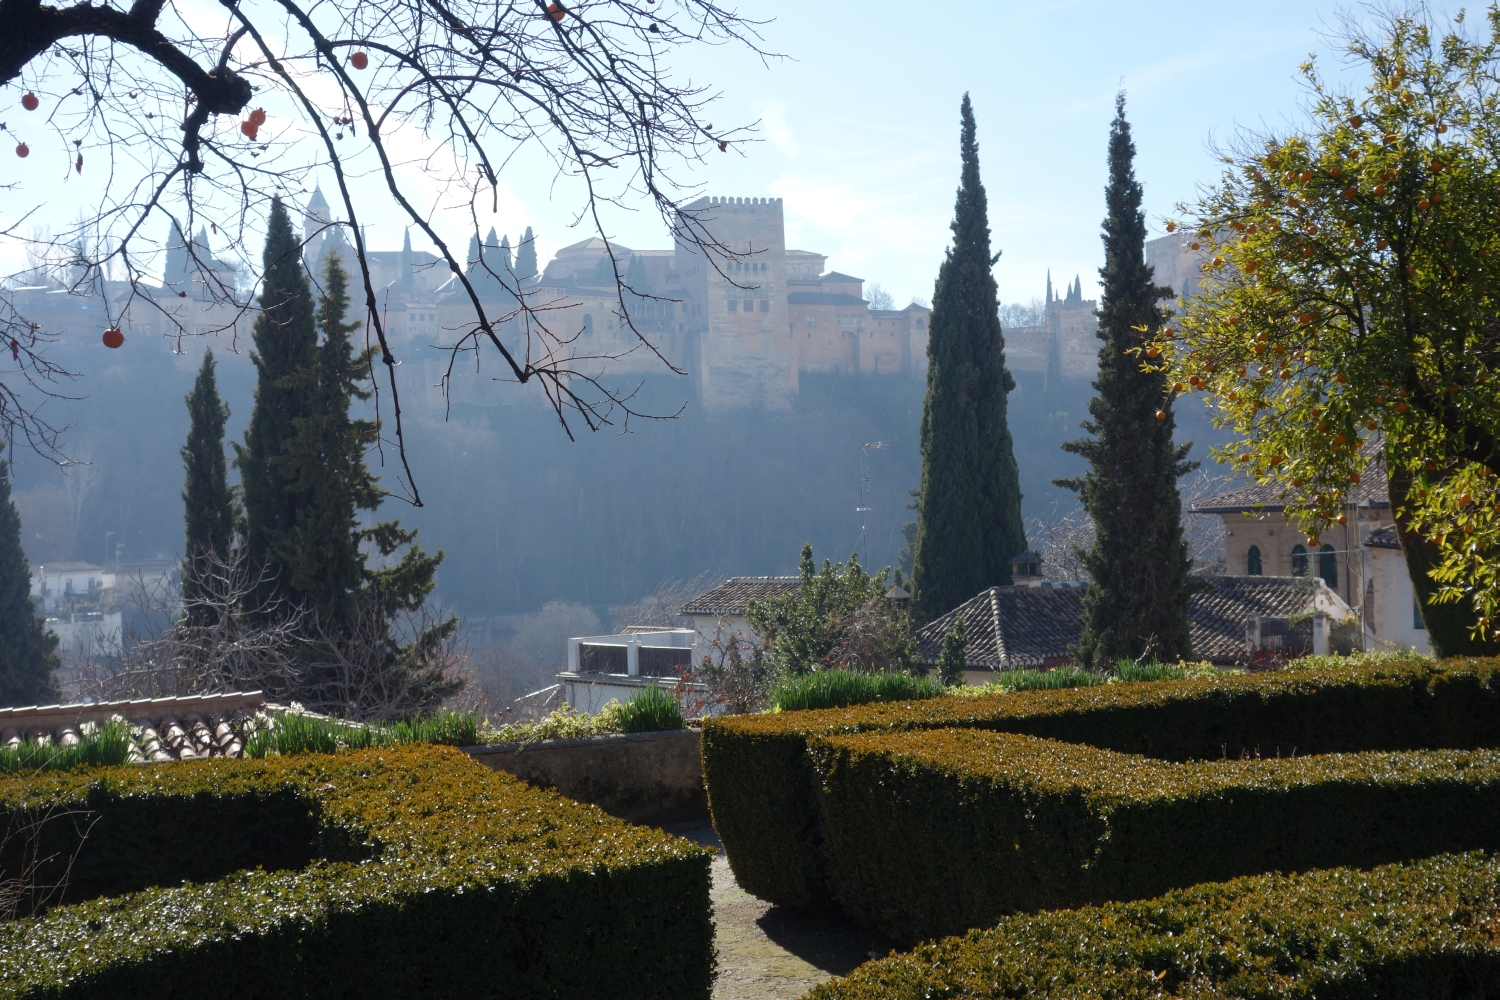 Gardens, Alhambra in the distance to the southwest